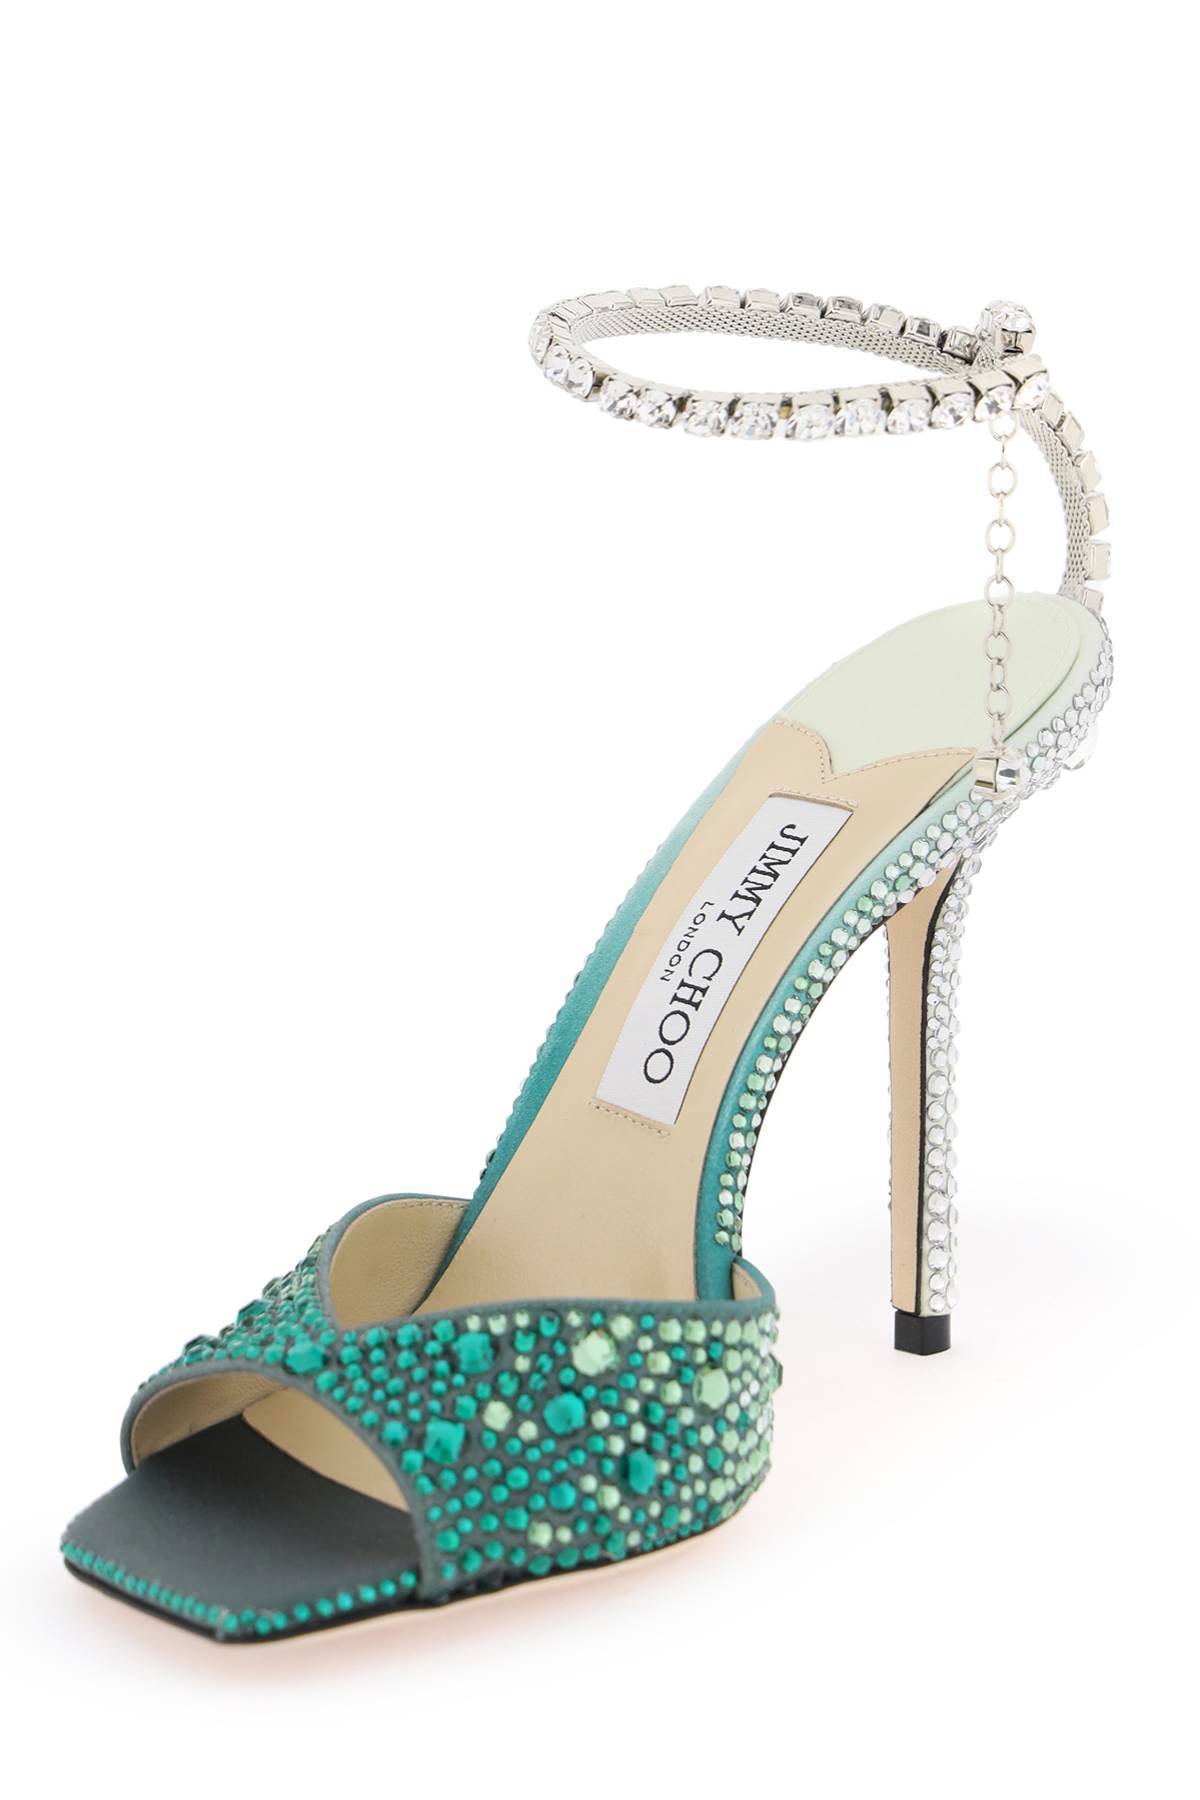 Shop Jimmy Choo Saeda 100 Sandals With Degradé Crystals In Green,silver